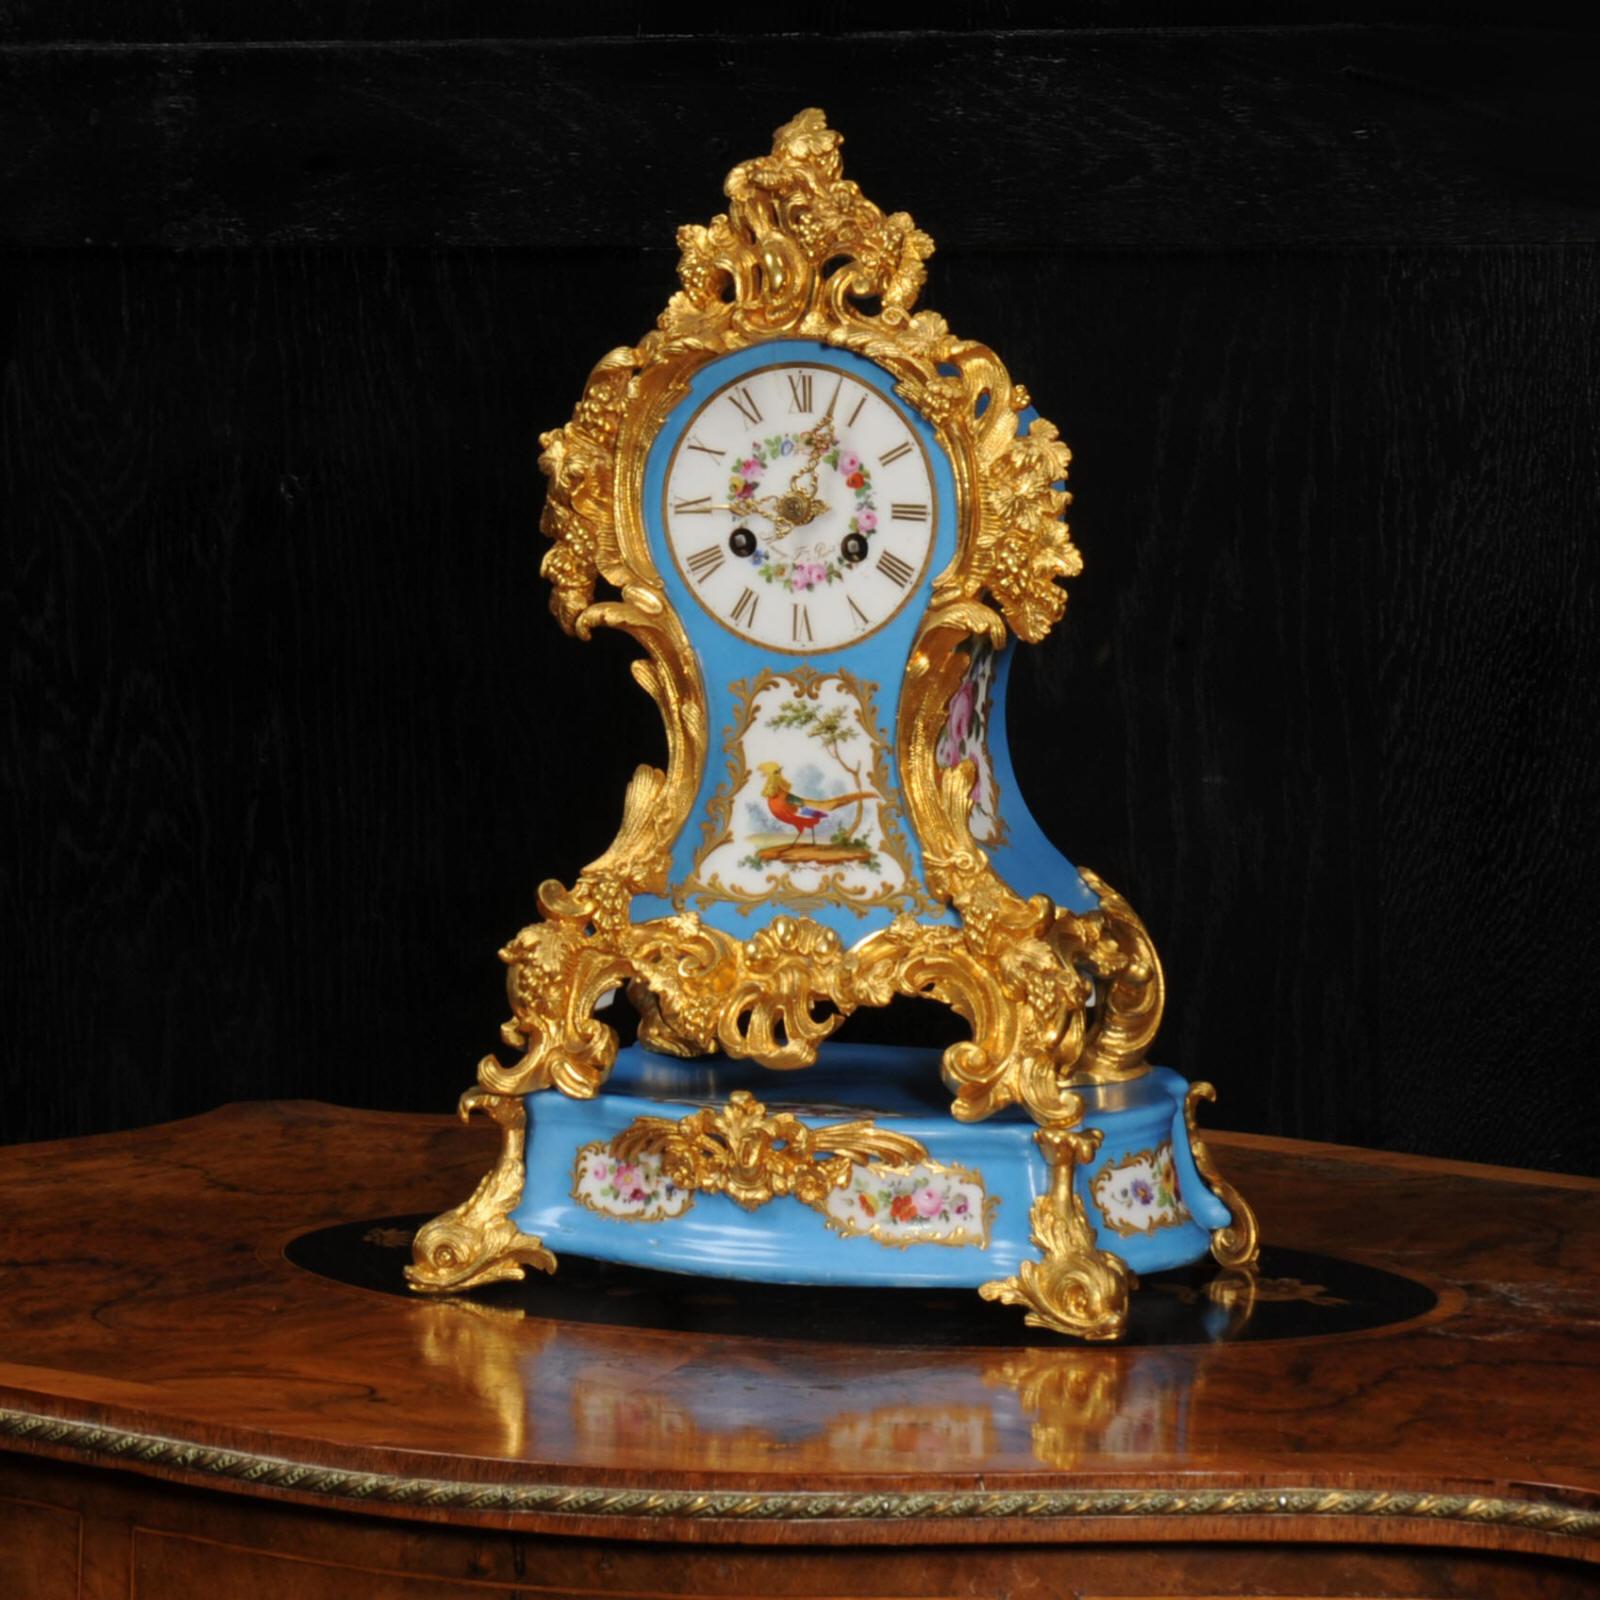 Louis XV Early Ormolu and Porcelain Antique French Clock by Raingo Freres